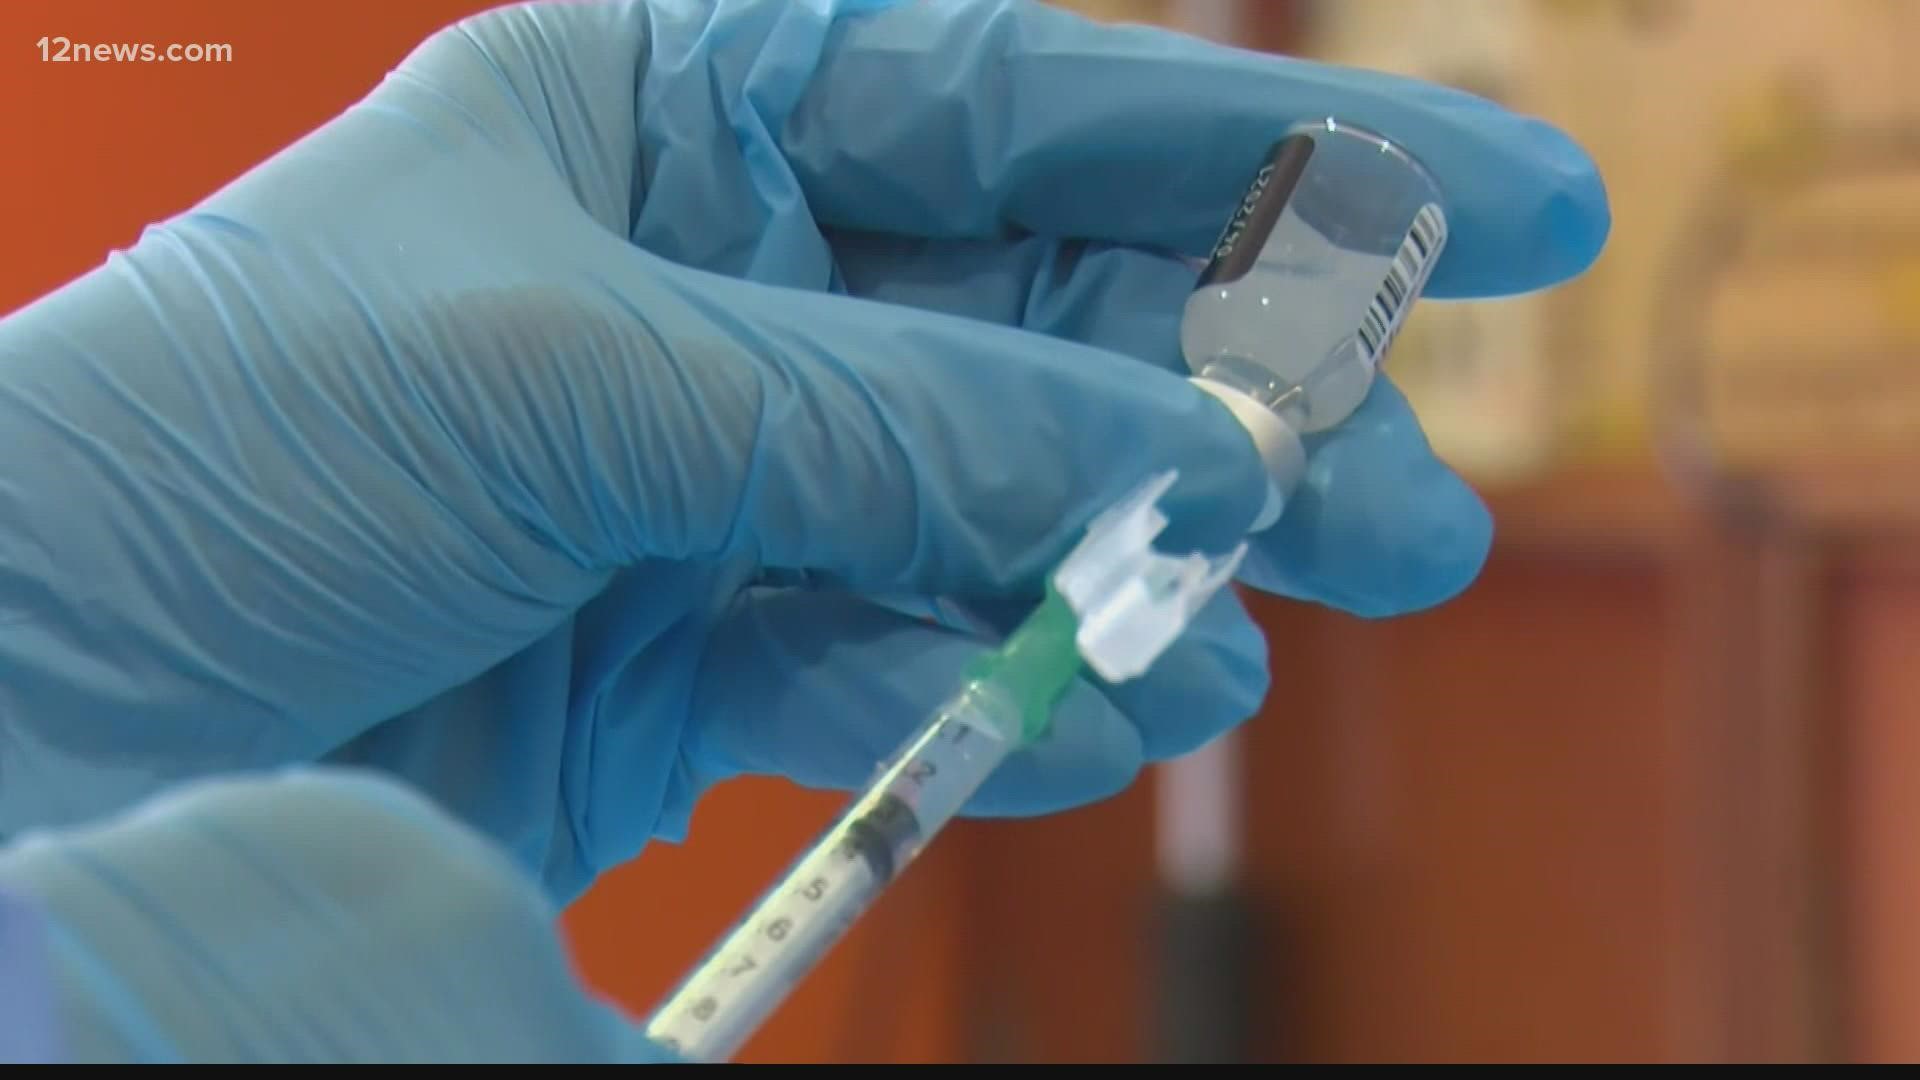 The City of Phoenix will require its employees to be fully vaccinated against COVID within two months. Police officers and firefighters fall under that requirement.